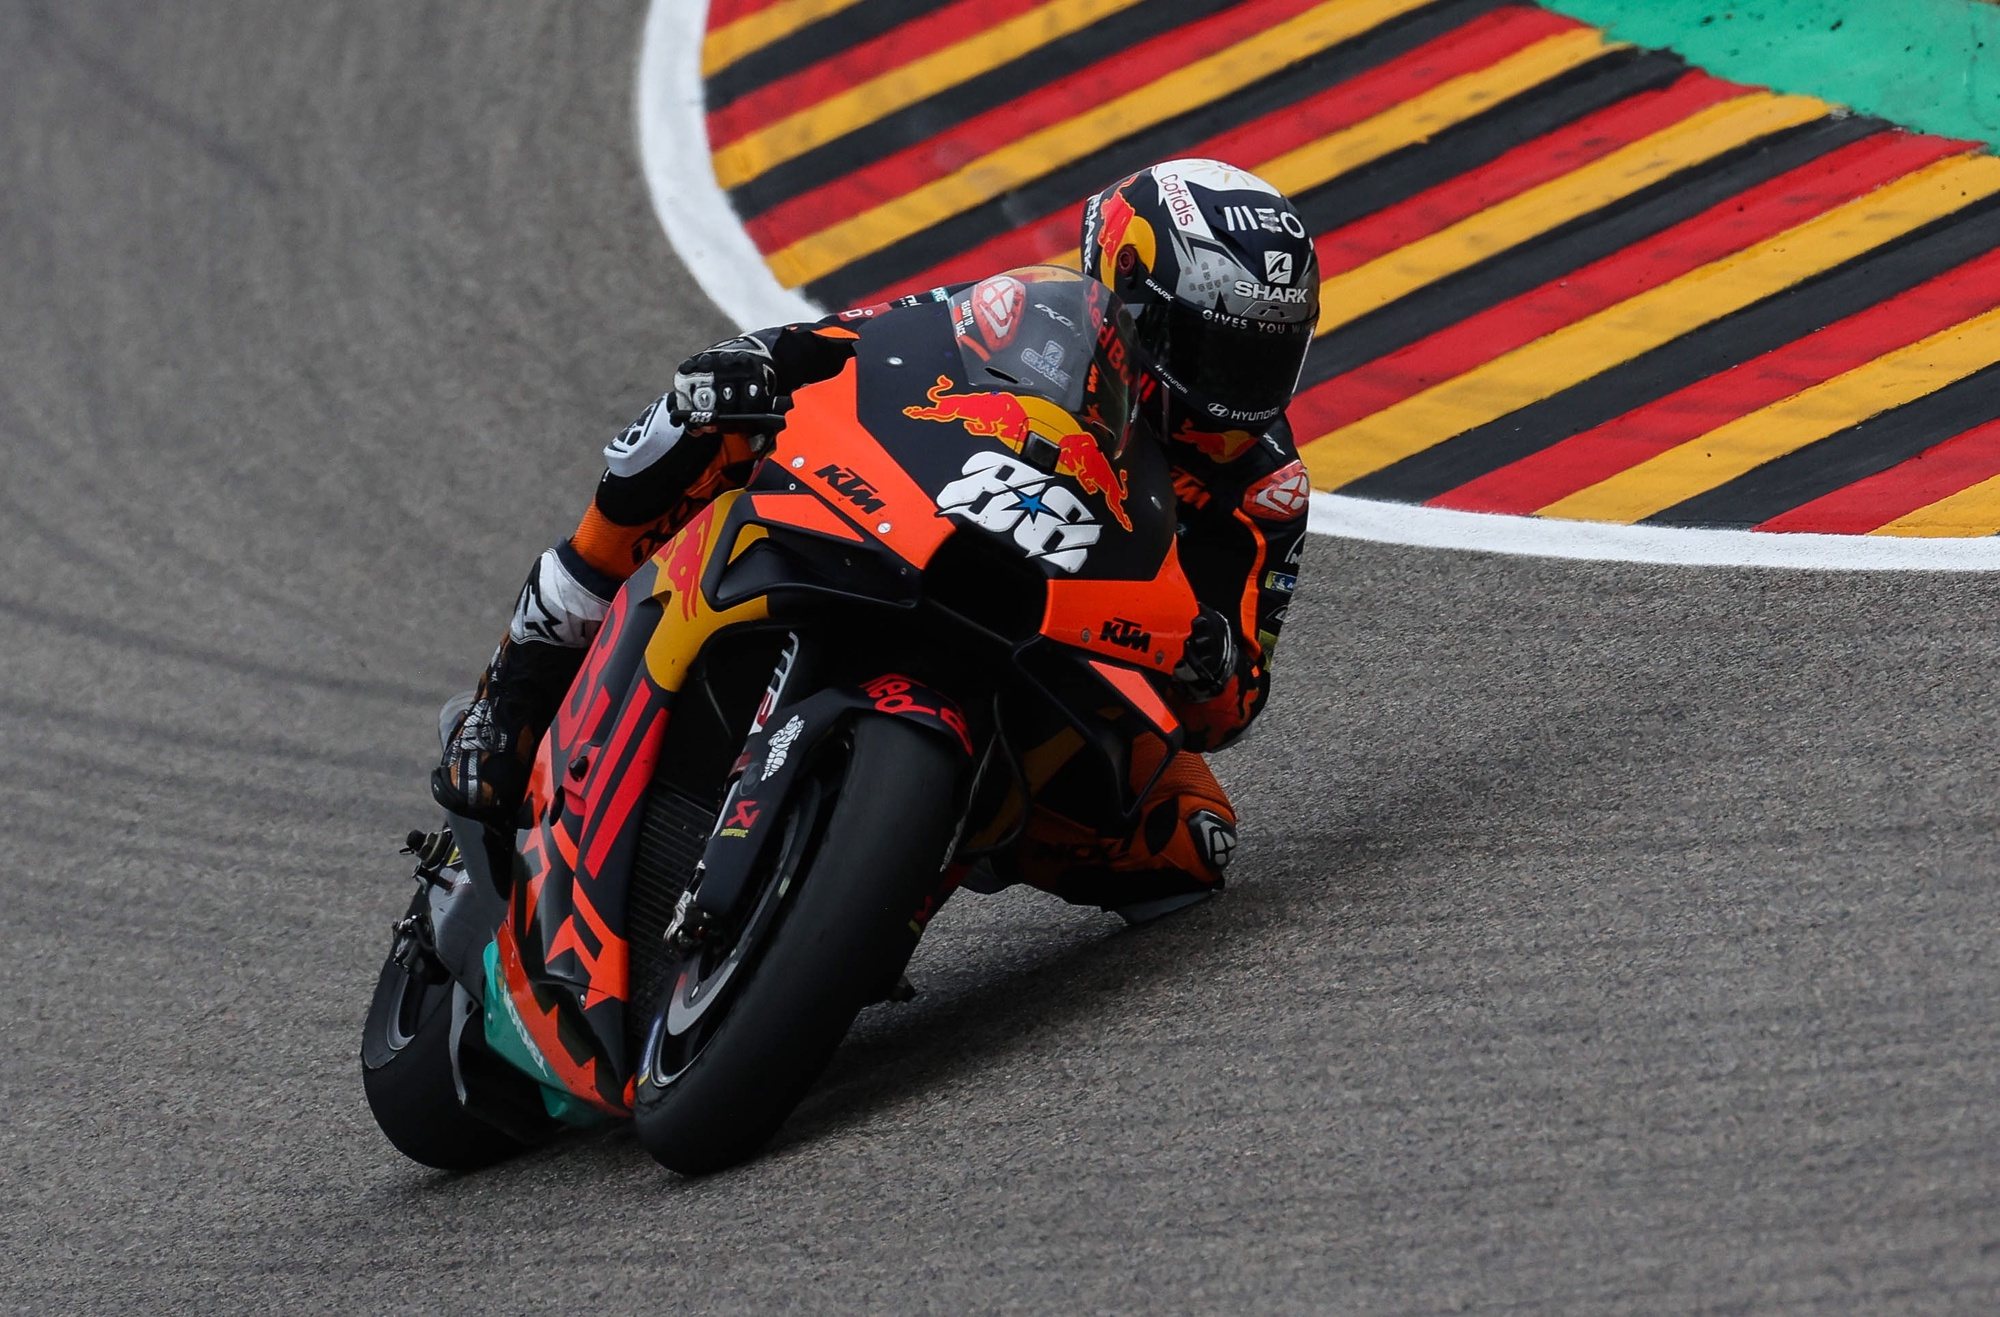 epa09288255 Portuguese MotoGP rider Miguel Oliveira of the Red Bull KTM Factory Racing team is on his way to take the second place in the Motorcycling Grand Prix of Germany at the Sachsenring racing circuit in Hohenstein-Ernstthal, Germany, 20 June 2021.  EPA/FILIP SINGER